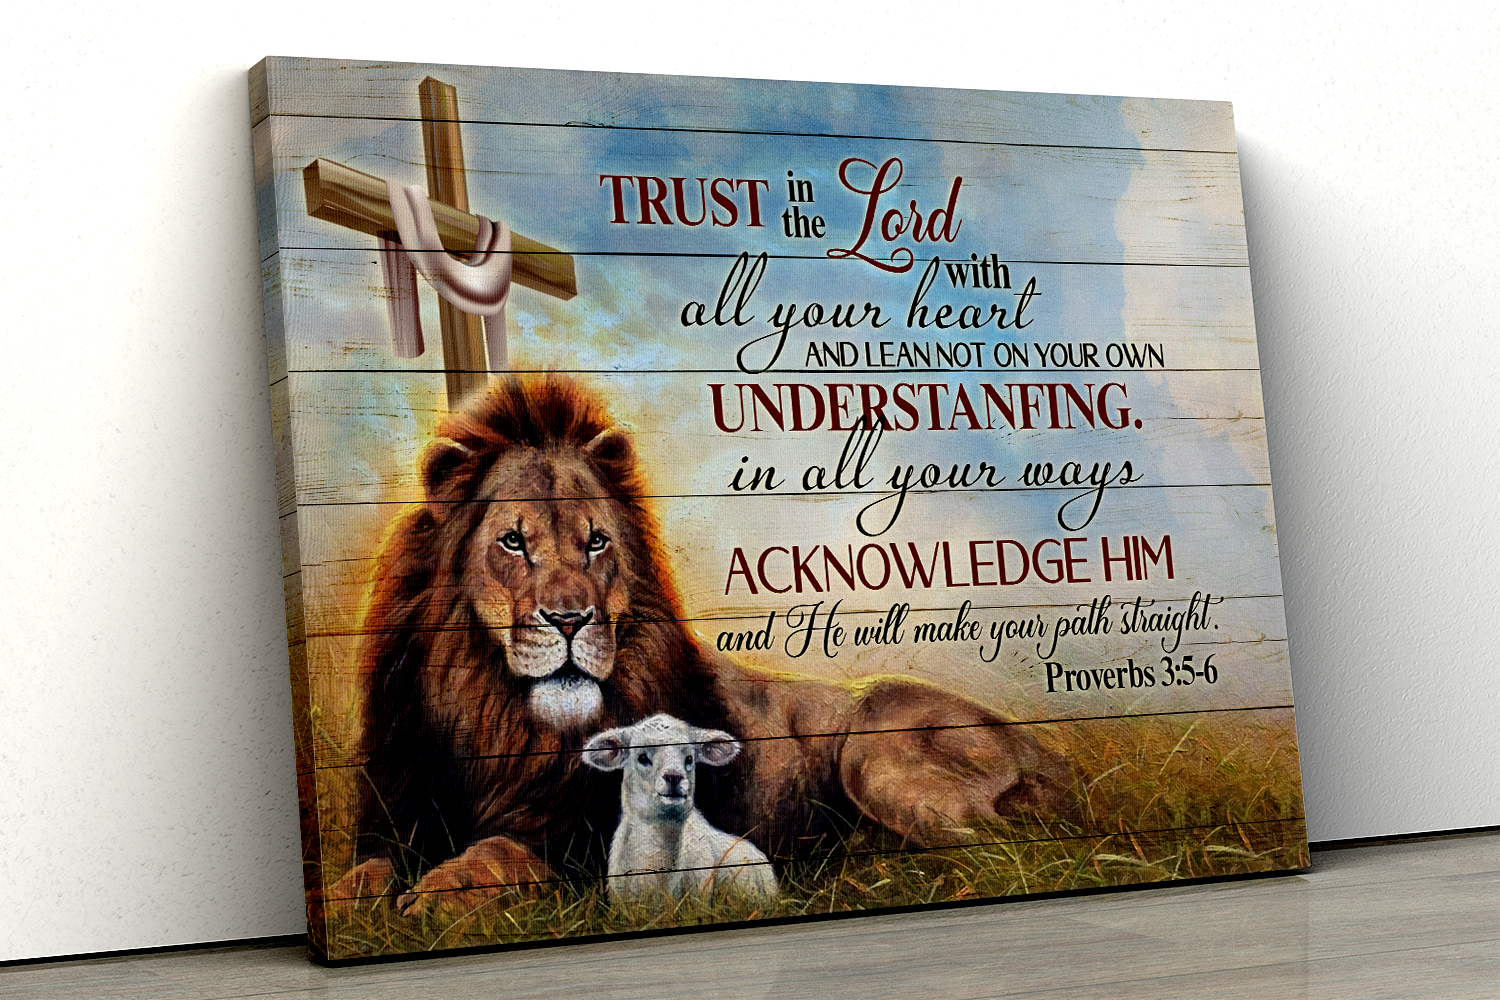 Jesus Lion And Lamb Canvas Proverbs 3:5-6 Trust In The Lord With All Your Heart Christian Art Canvas Prints